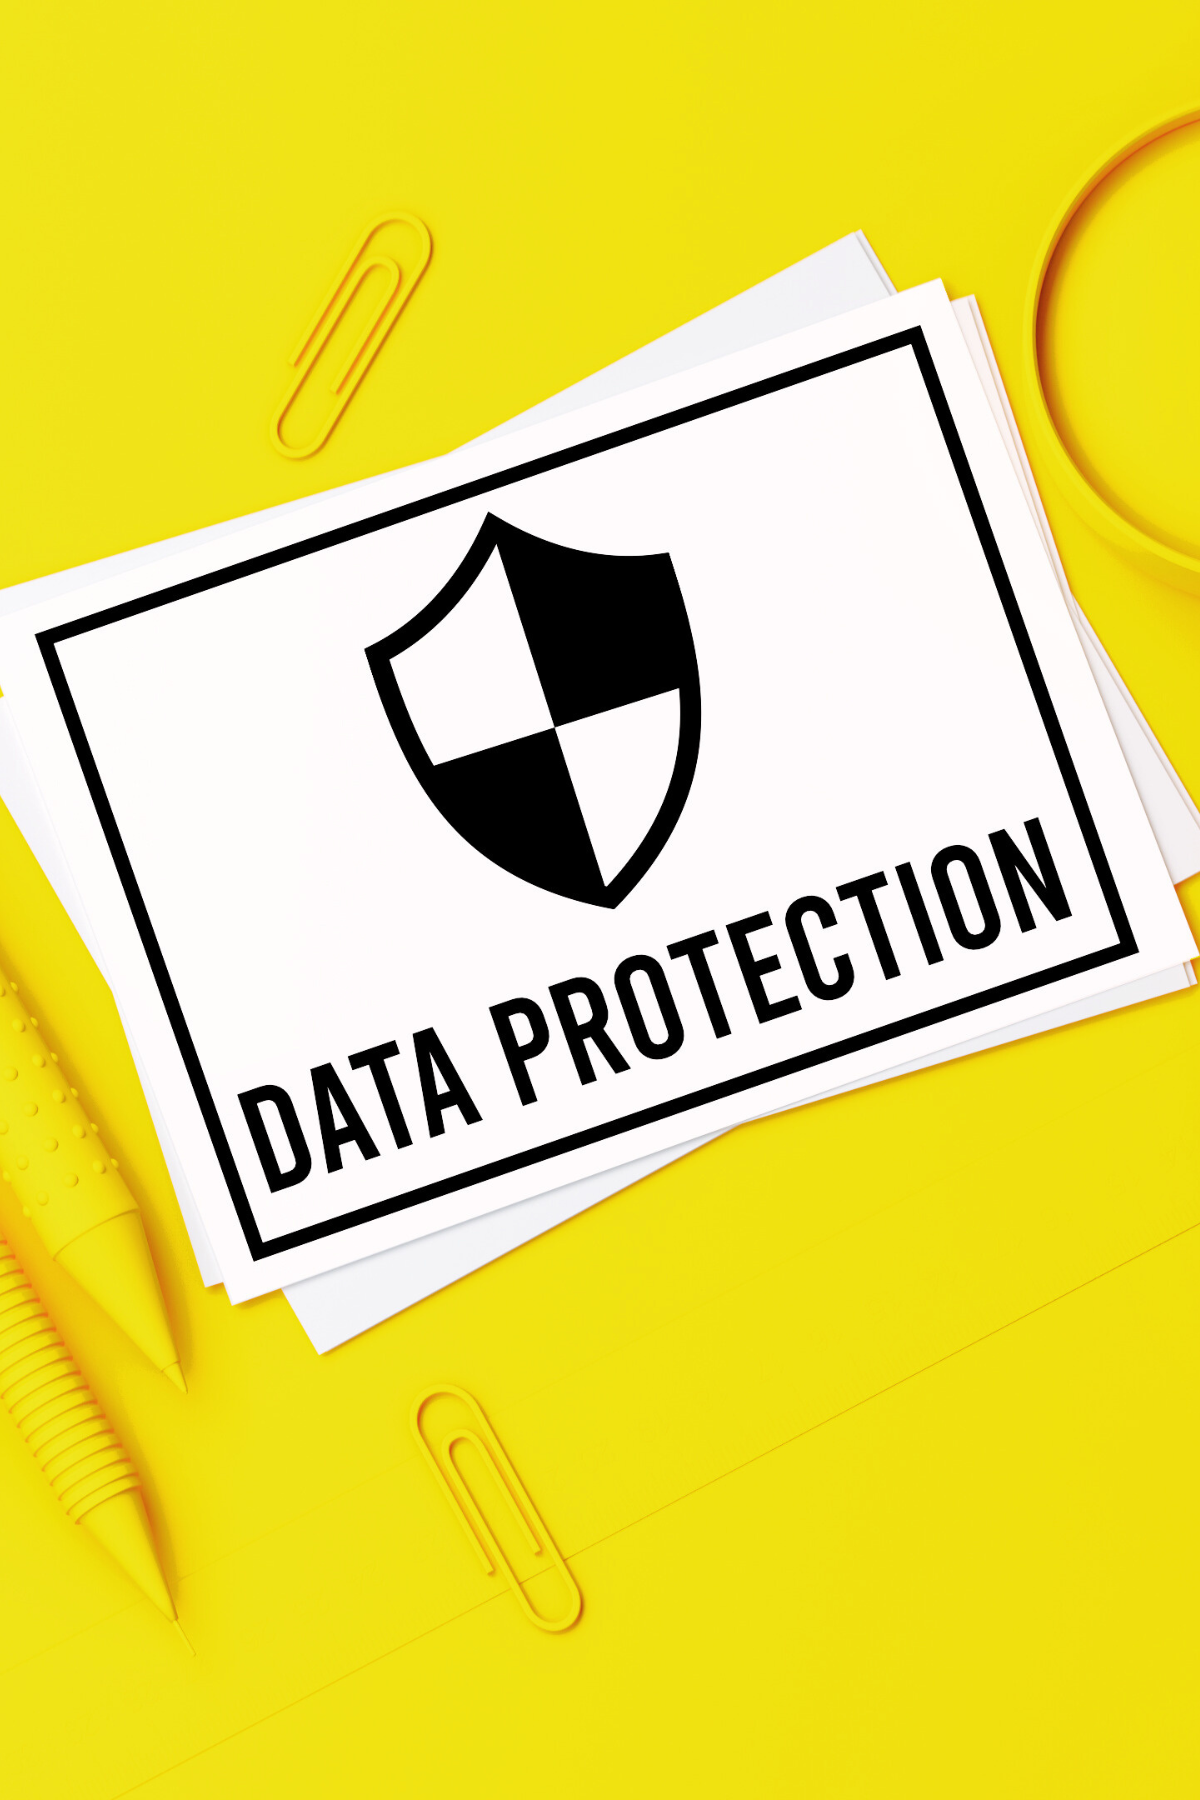 Protect your community from invasive Data mining and lack of privacy.